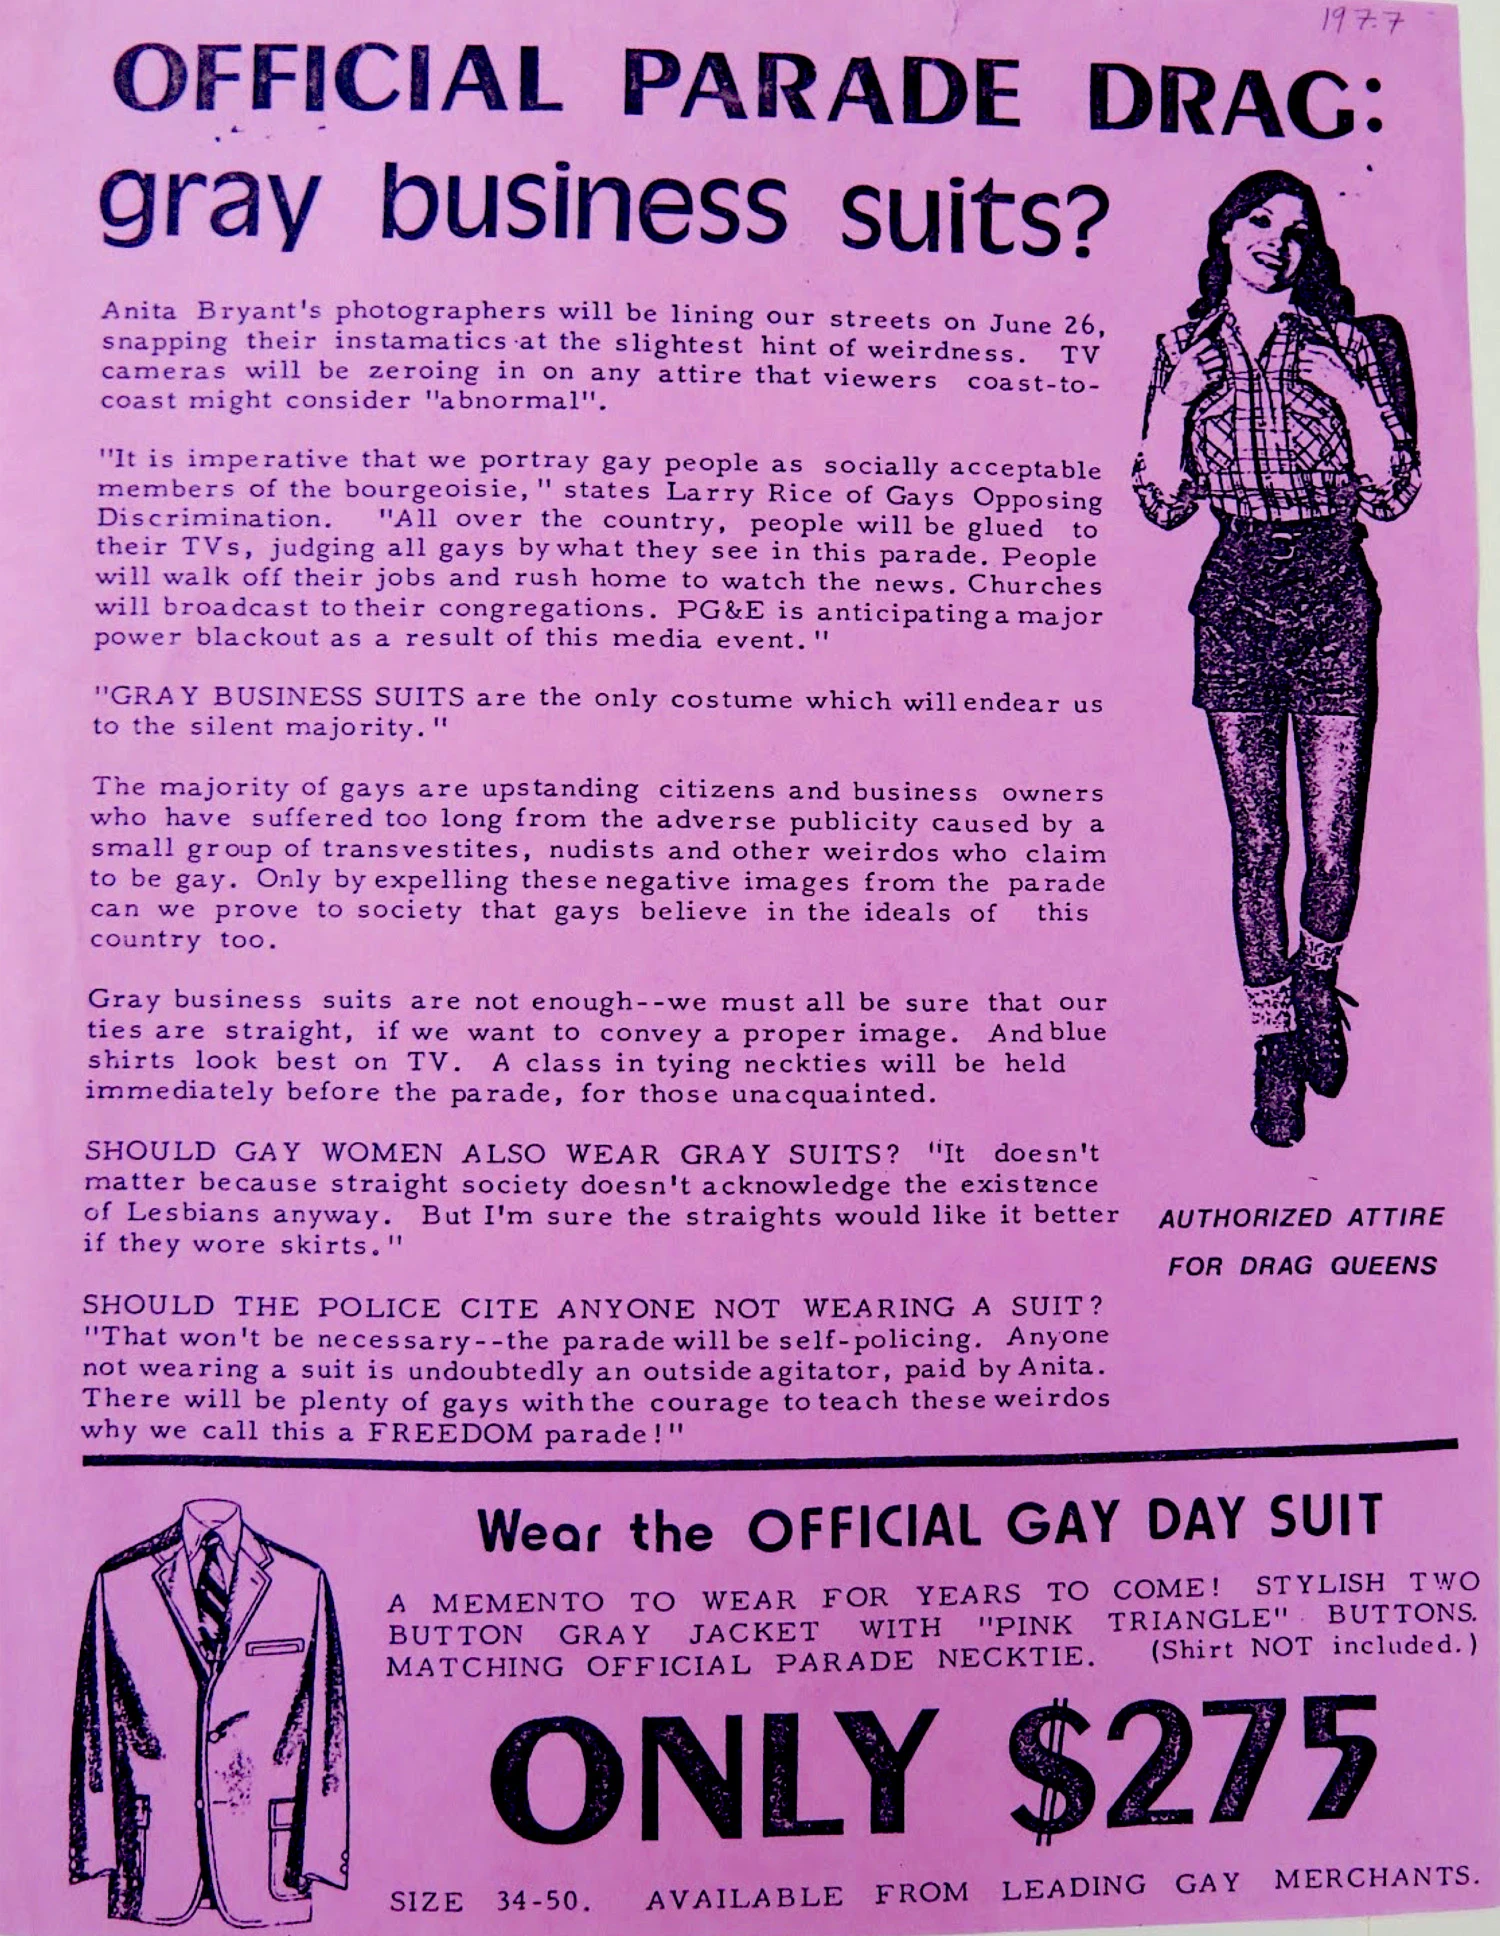 Flyer urging marchers to obtain their official gray business suits